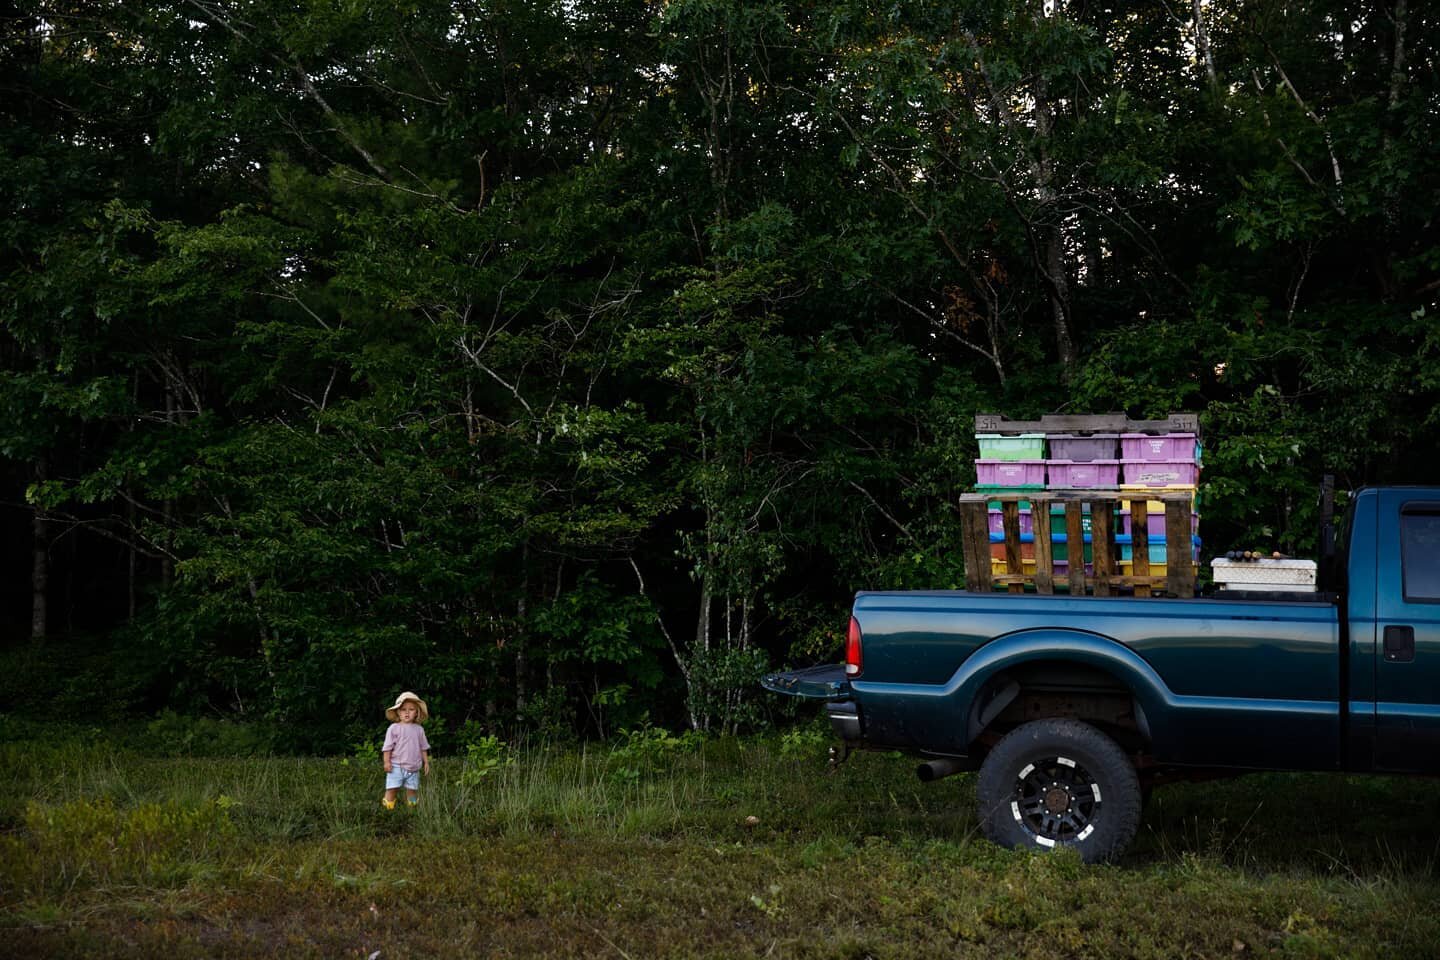 We will be in Portland delivering blueberries on Tuesday this week. Get your orders in today if you'd like to us to include your berries on the truck 🚚 🚛 
.
.
.
📷 @bluehorsephoto
#wildmaineblueberries #wildblueberries #maine #mainefarmers #mainefo